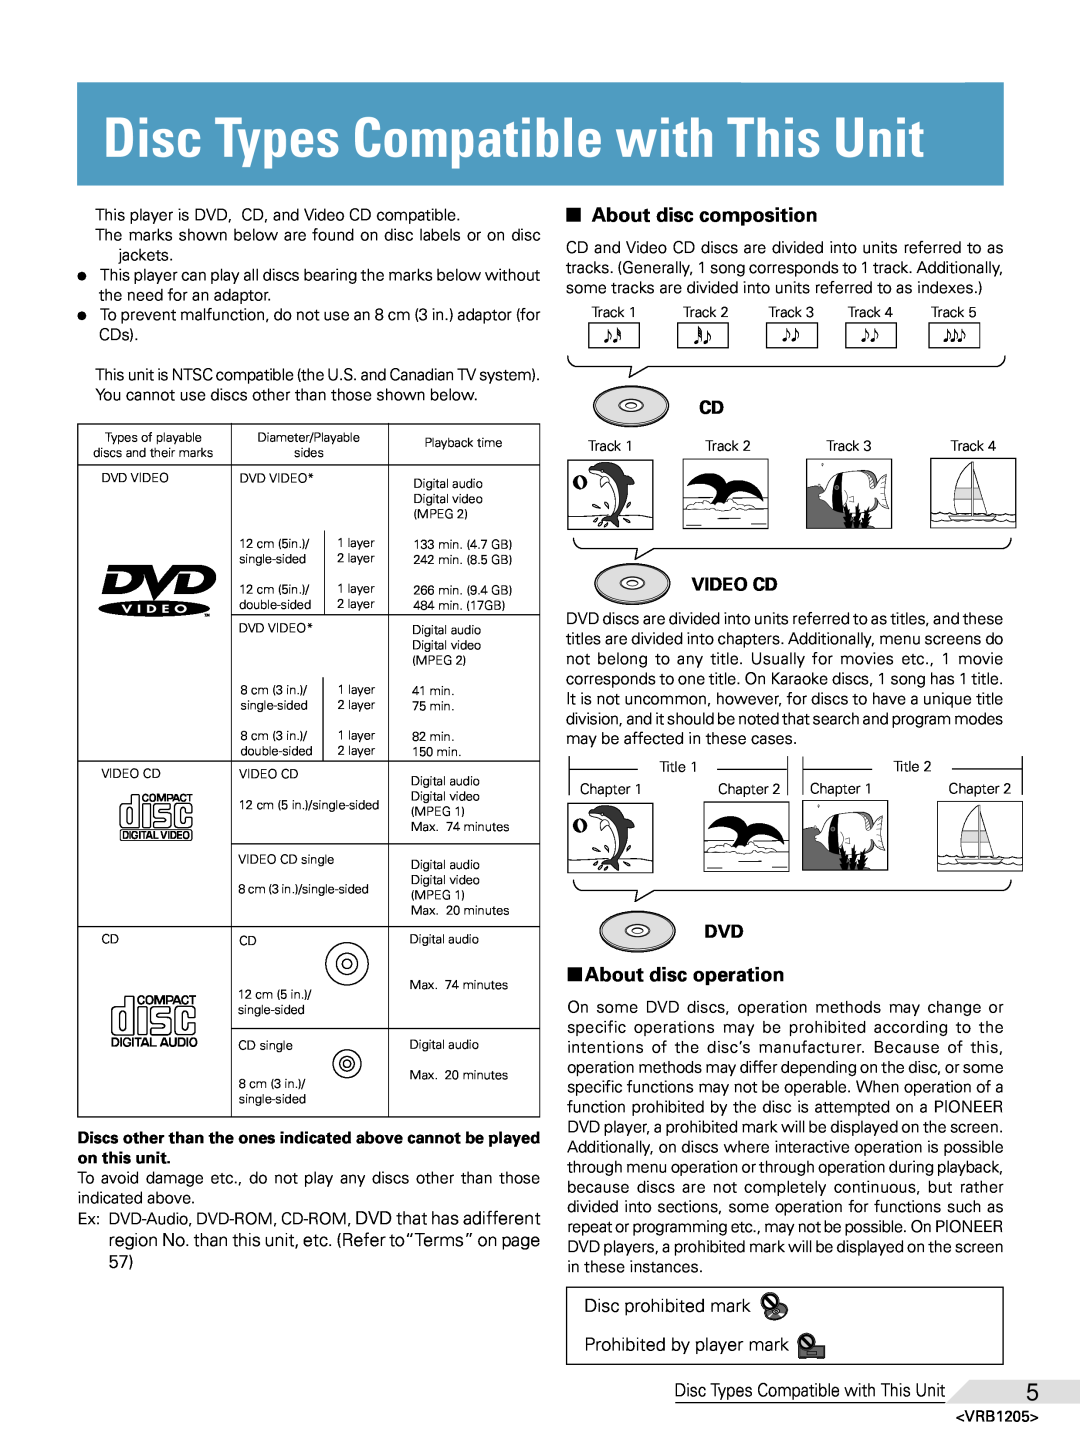 Pioneer DV-05 Disc Types Compatible with This Unit, About disc composition, About disc operation, Video Cd 